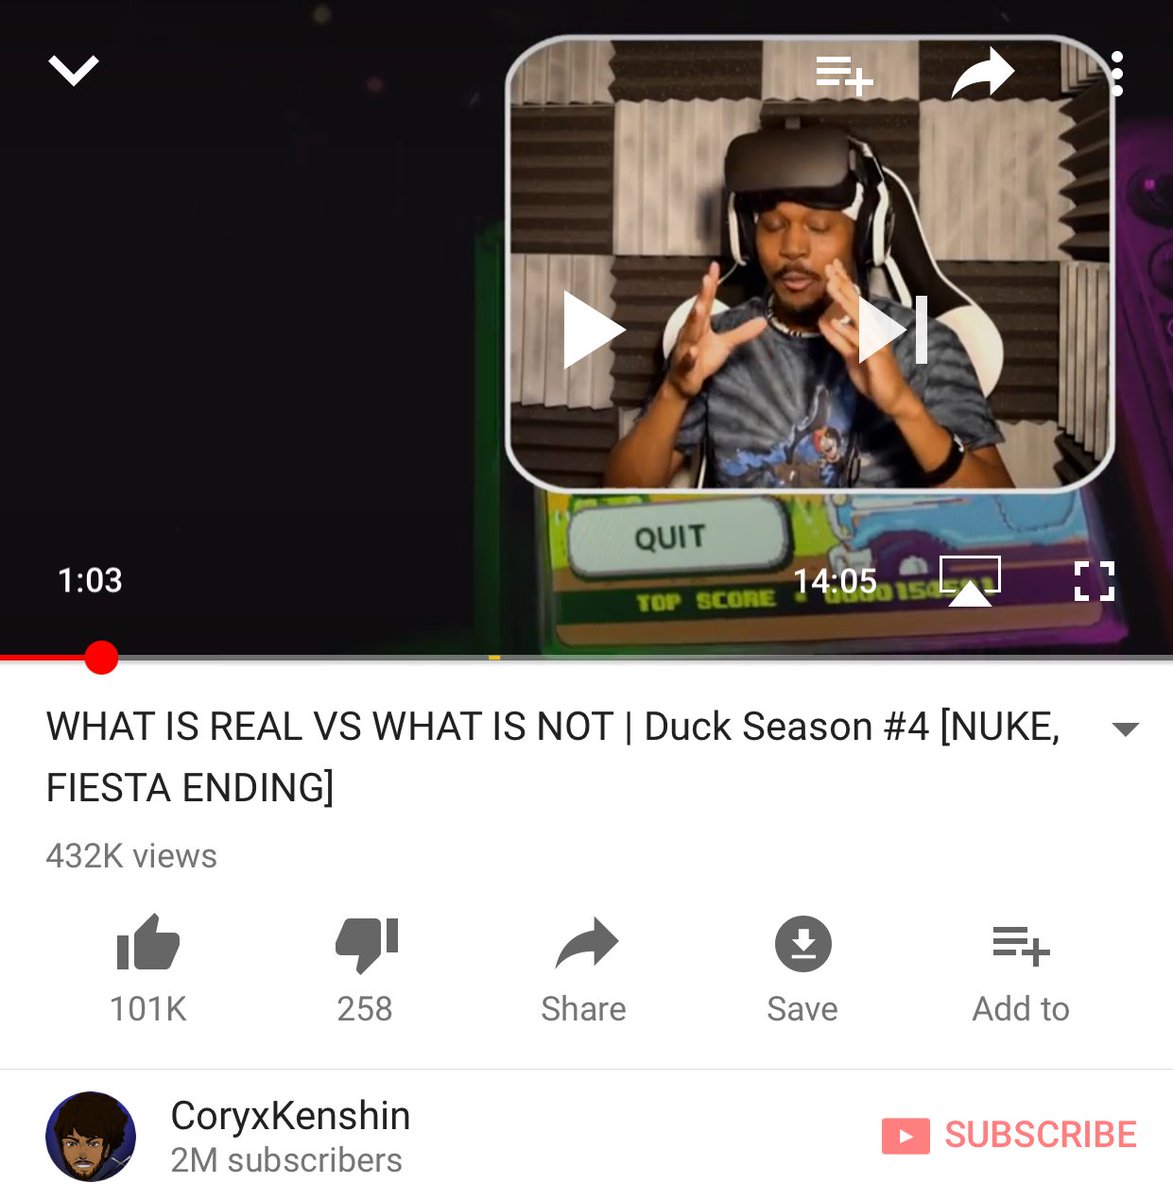 Cory On Twitter 100k Likes On Yesterday Video Light Work For The Samurai Lol Freakin Legends I Tell You What Do You Wanna See Today Https T Co Rq6w8fsitg - coryxkenshin roblox name